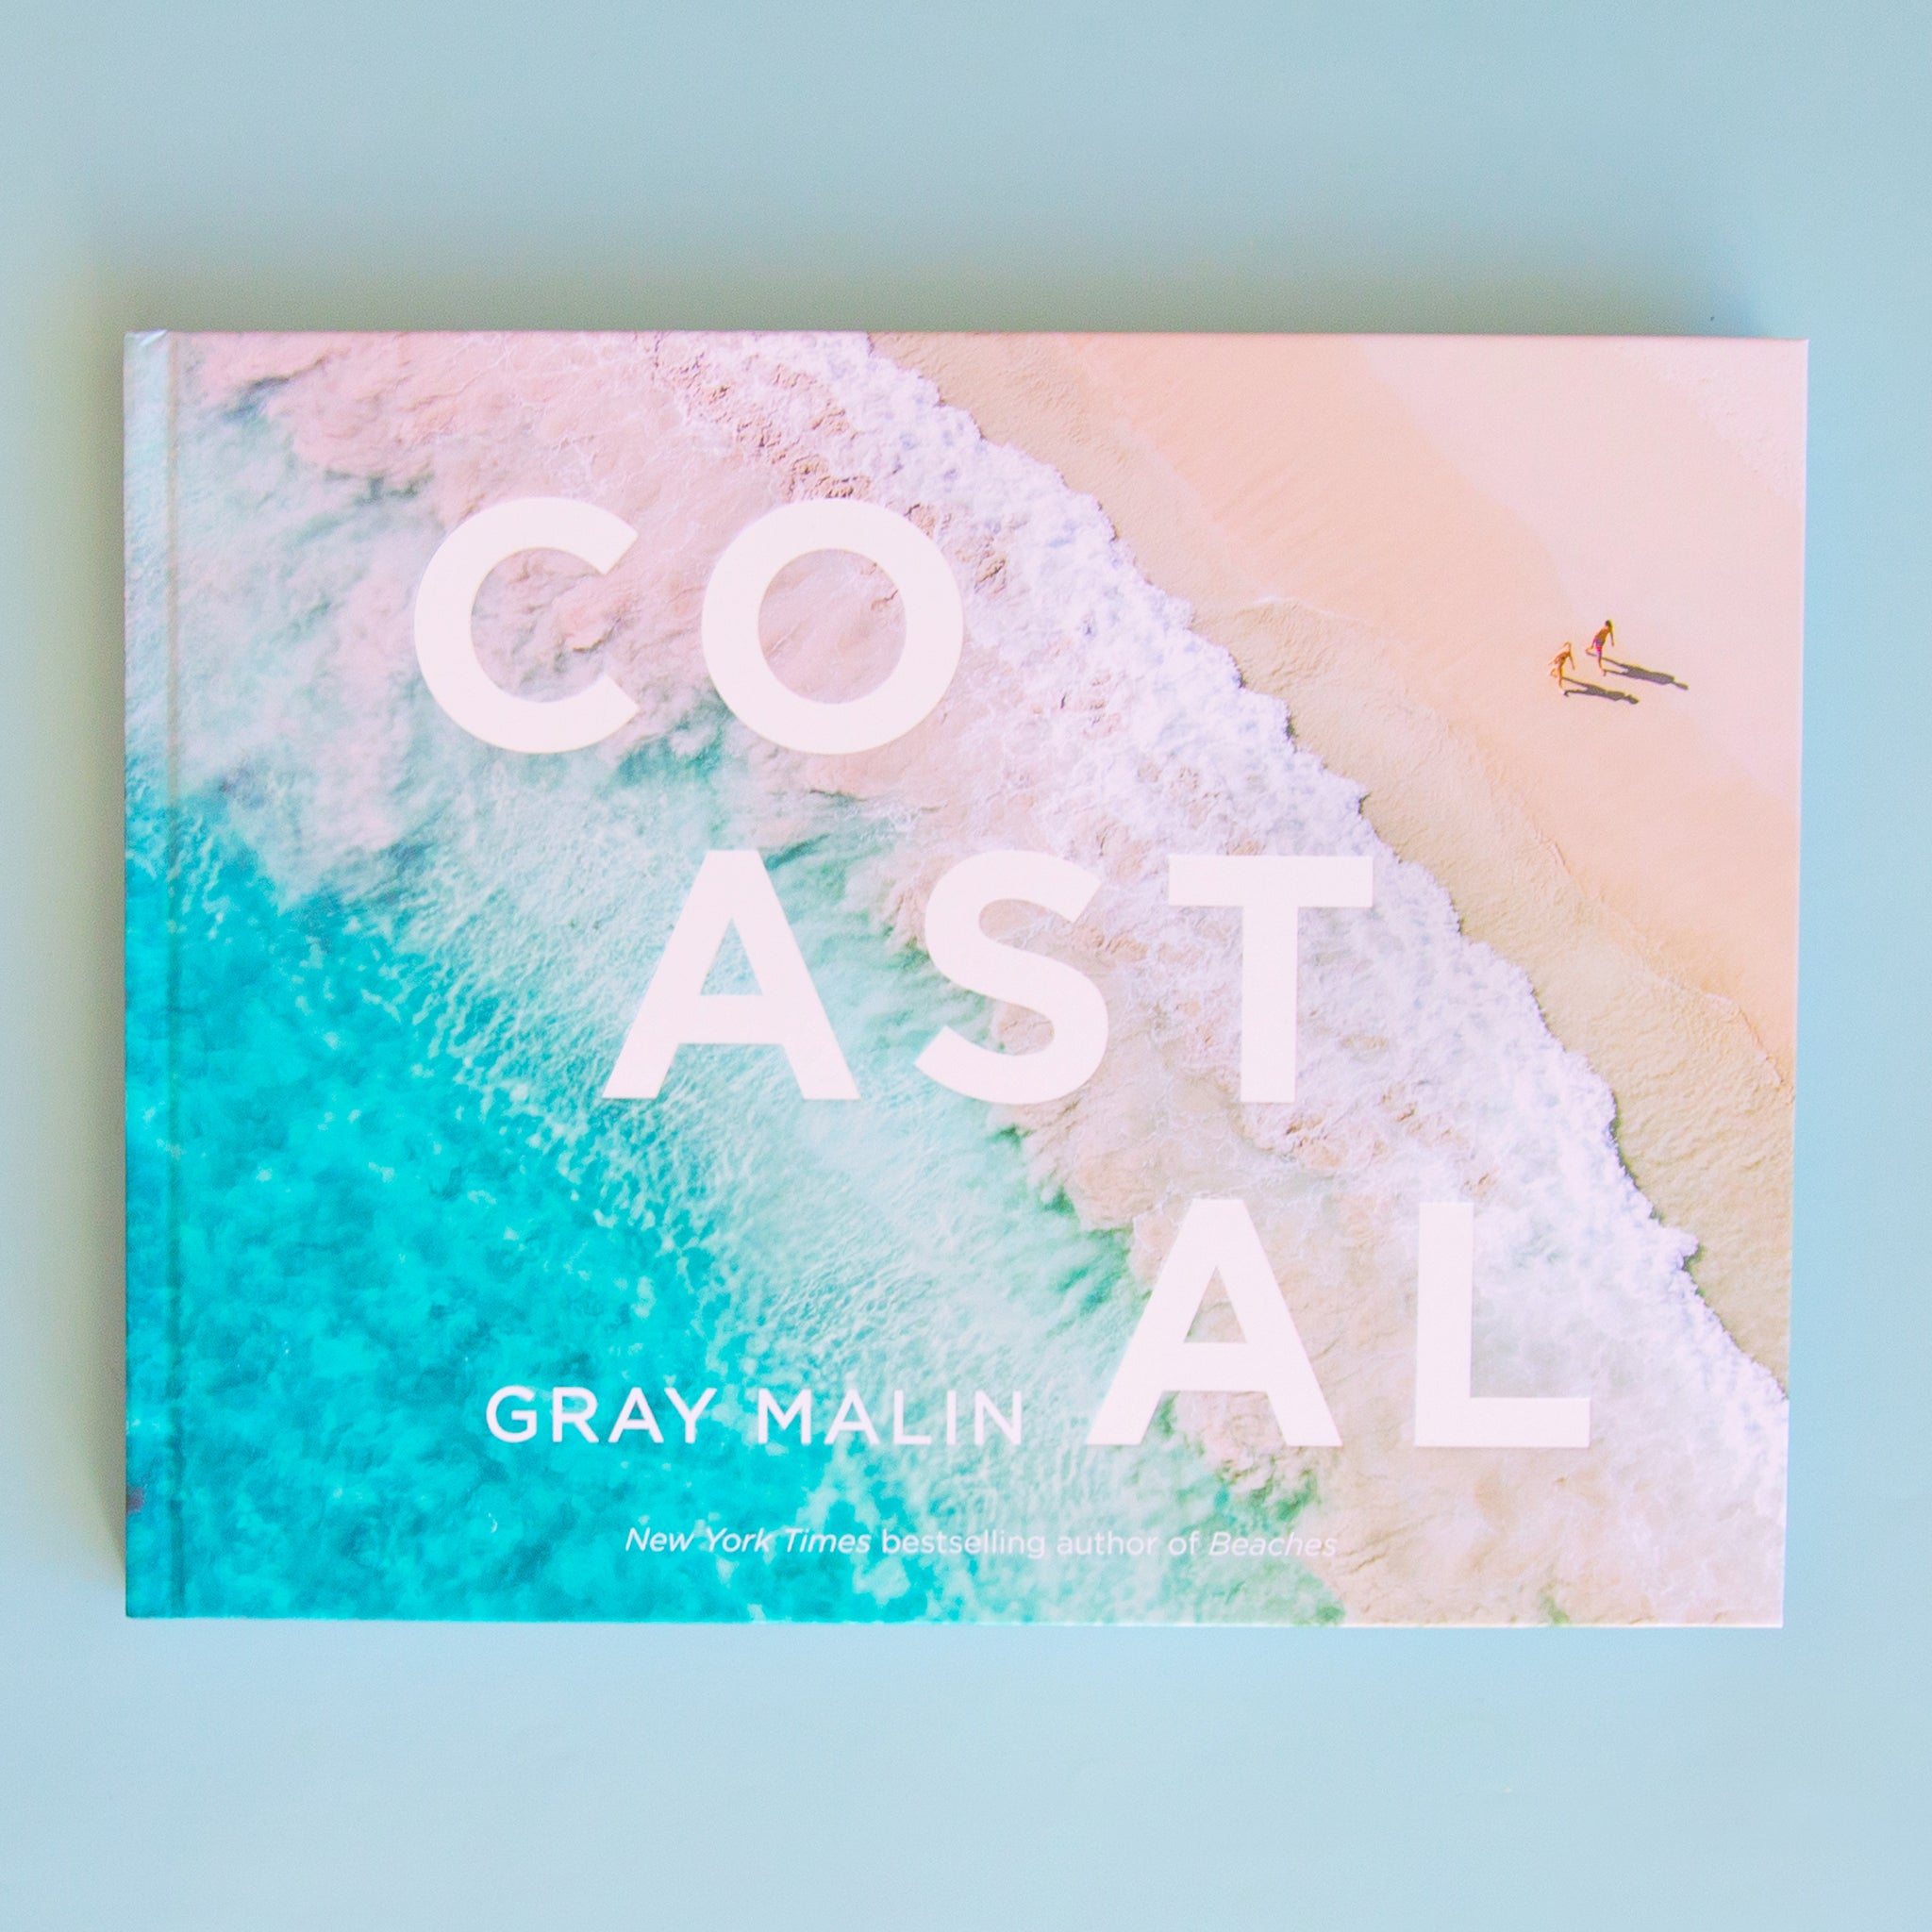 On a blue background is a Gray Malin book cover with one of his ocean photography shots as well as white text that reads, "COASTAL".